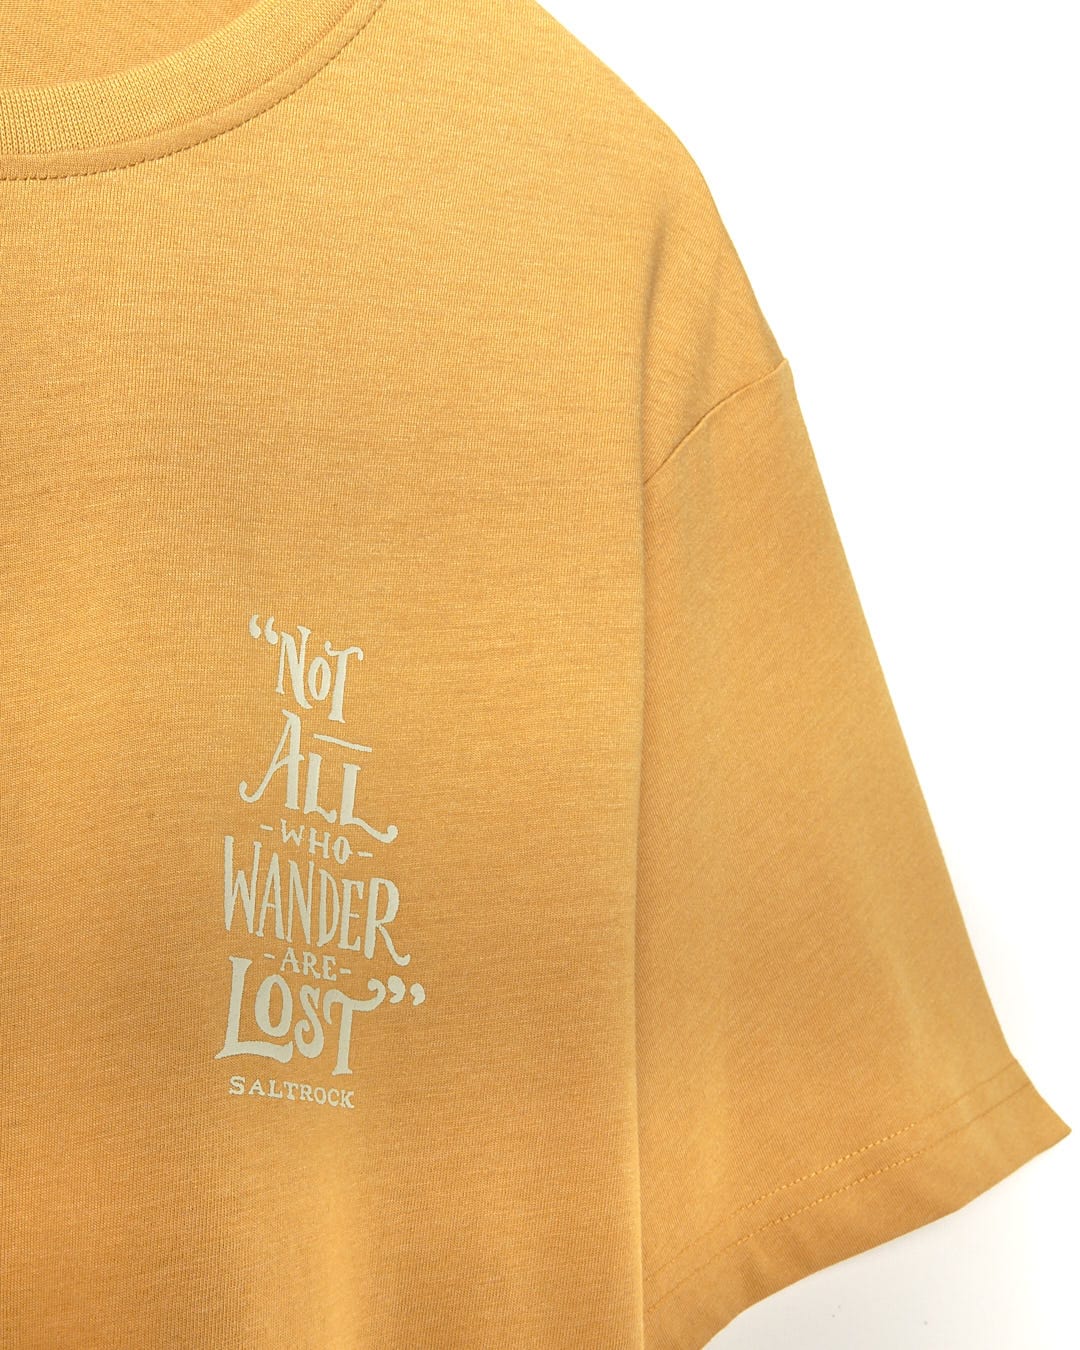 A Lost Ships - Mens Short Sleeve T-Shirt - Yellow by Saltrock that says not all wanderers are lost.